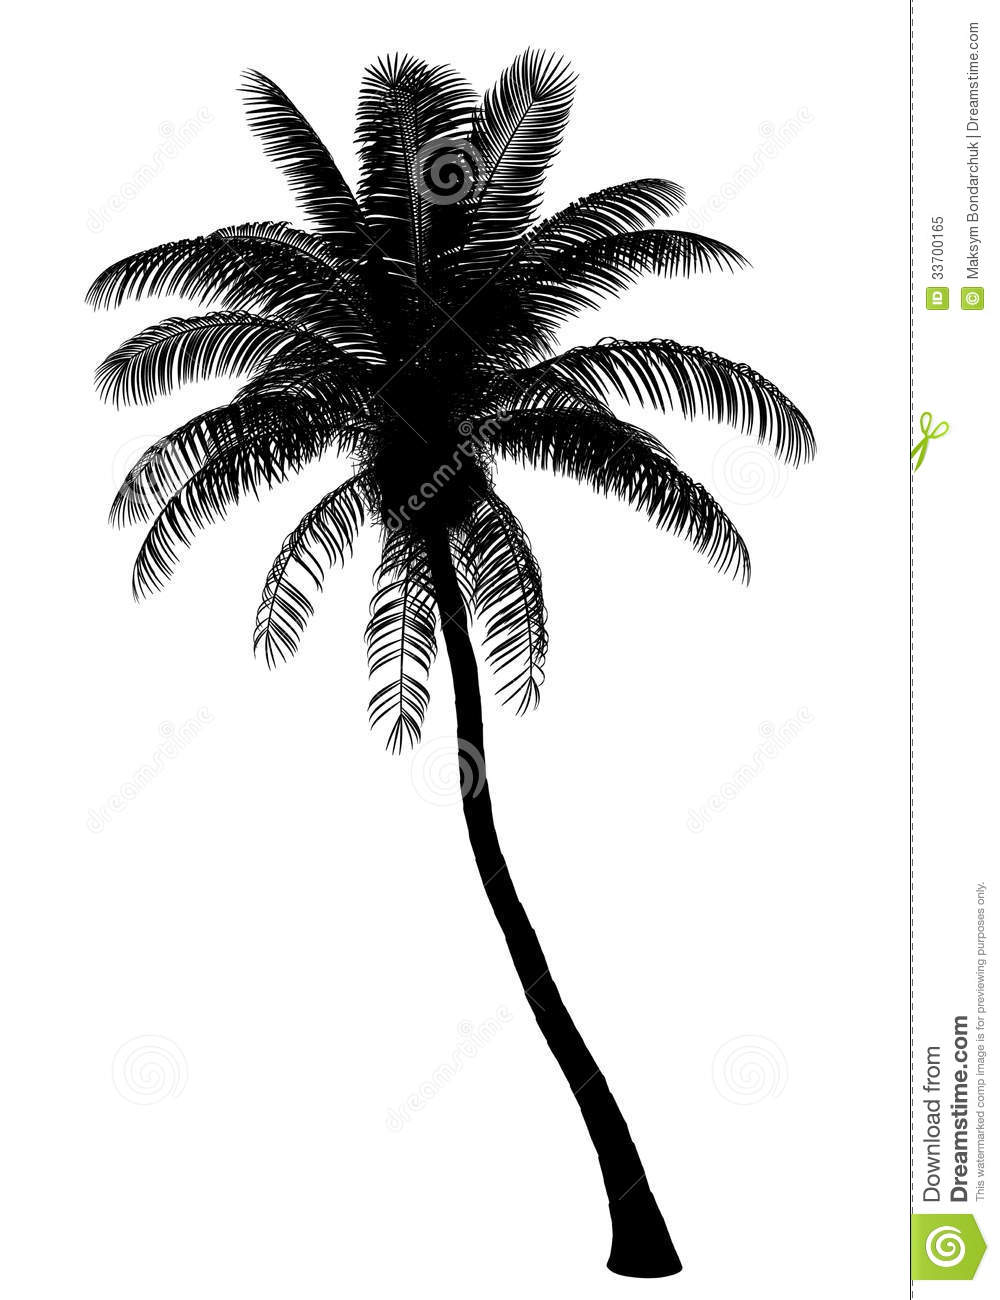 Silhouette Of Coconut Palm Tree Isolated On White Royalty Free Stock